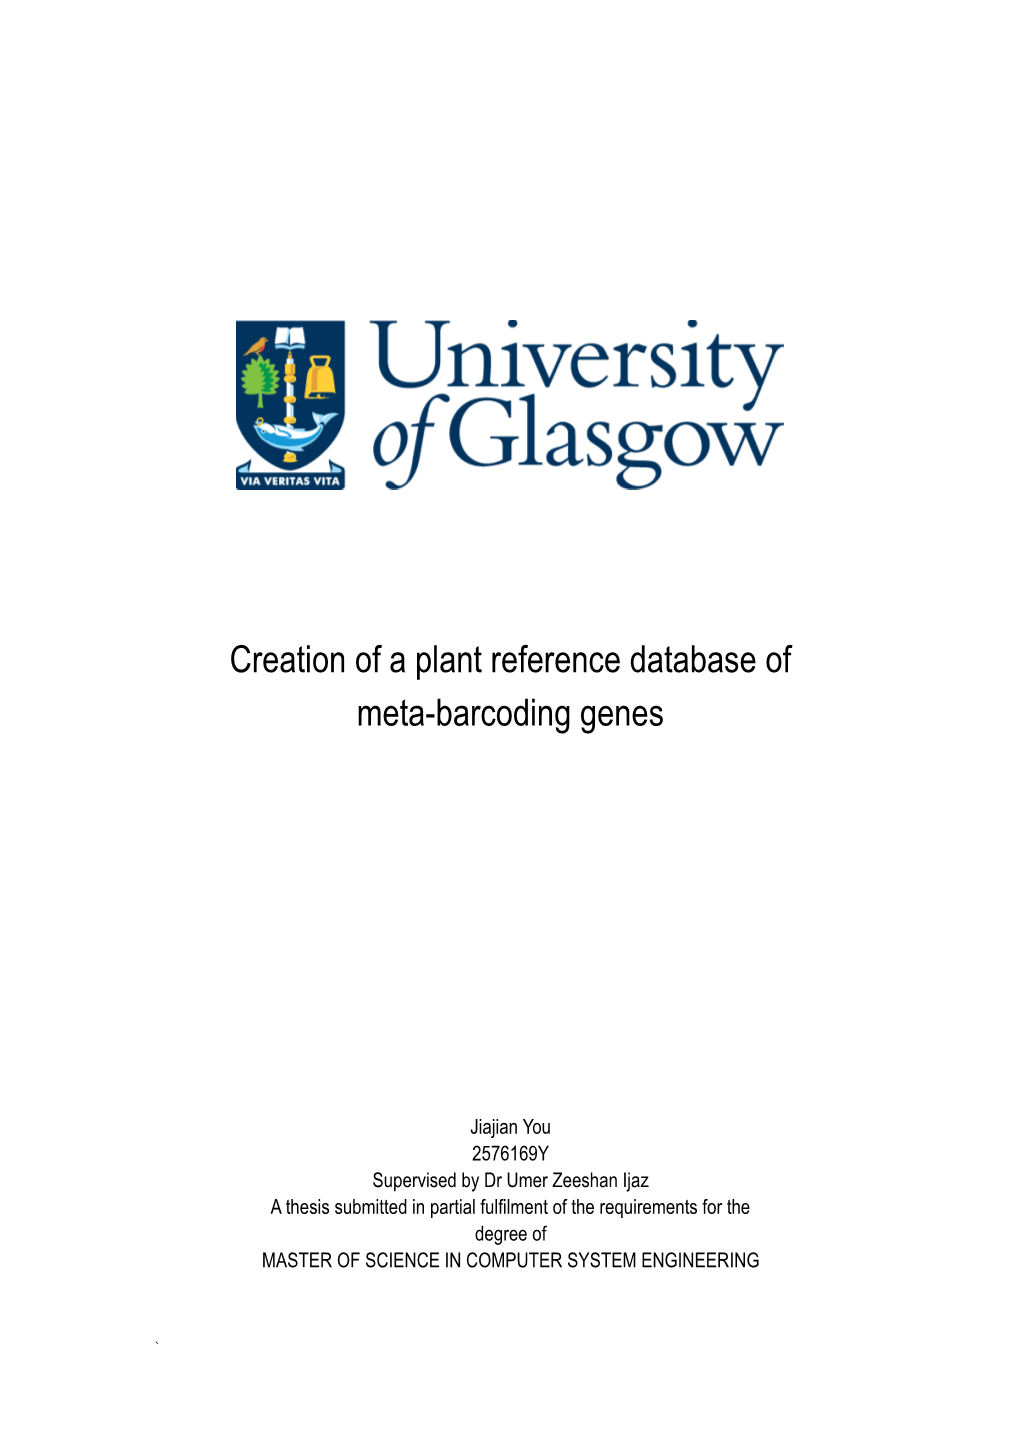 Creation of a Plant Reference Database of Meta-Barcoding Genes